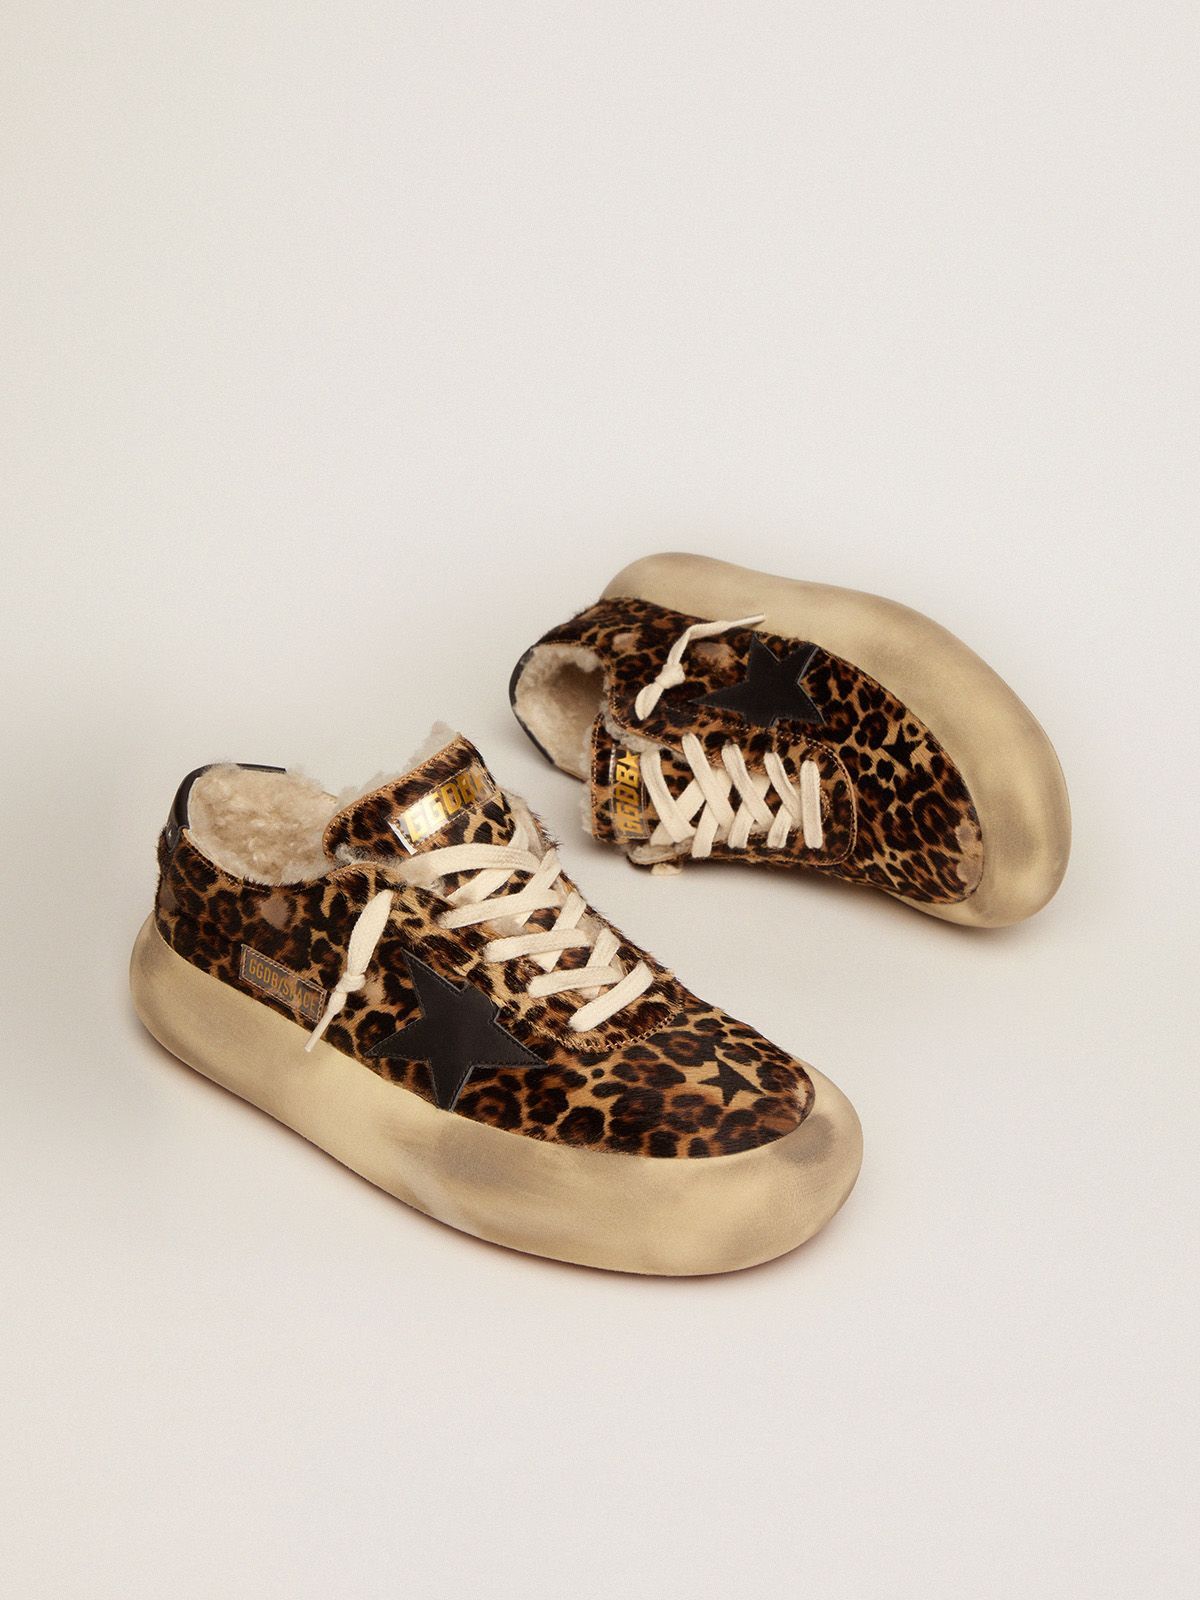 Space-Star Shoes in Animal-Print Pony Skin with Shearling Lining